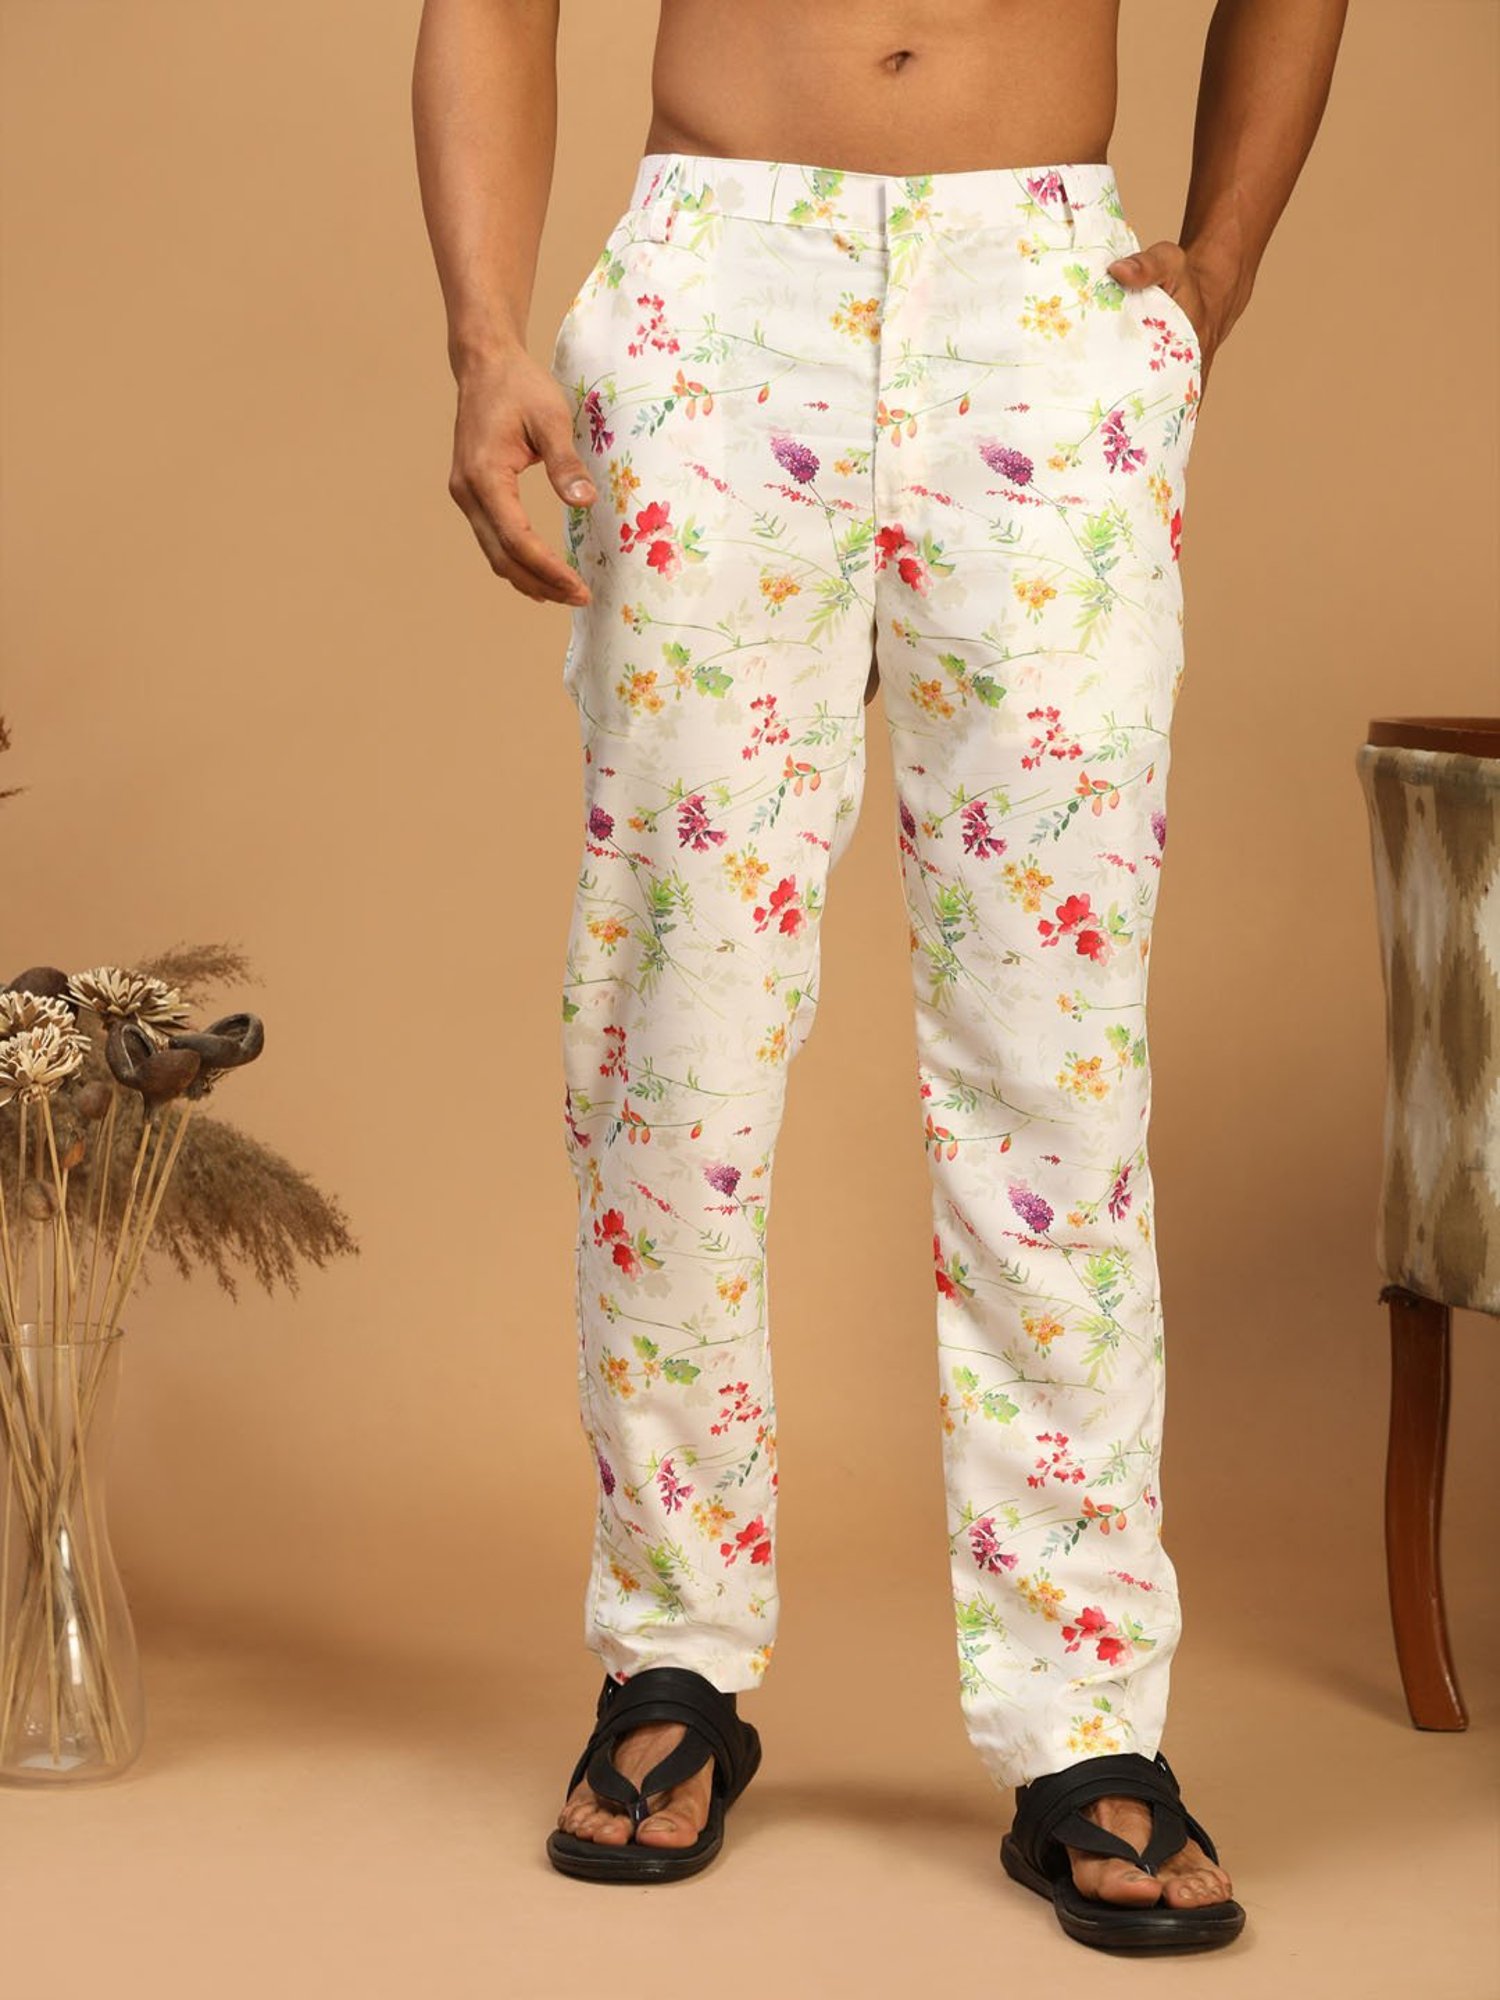 Men's Pajama Pants In Floral Silk by Tom Ford | Coltorti Boutique